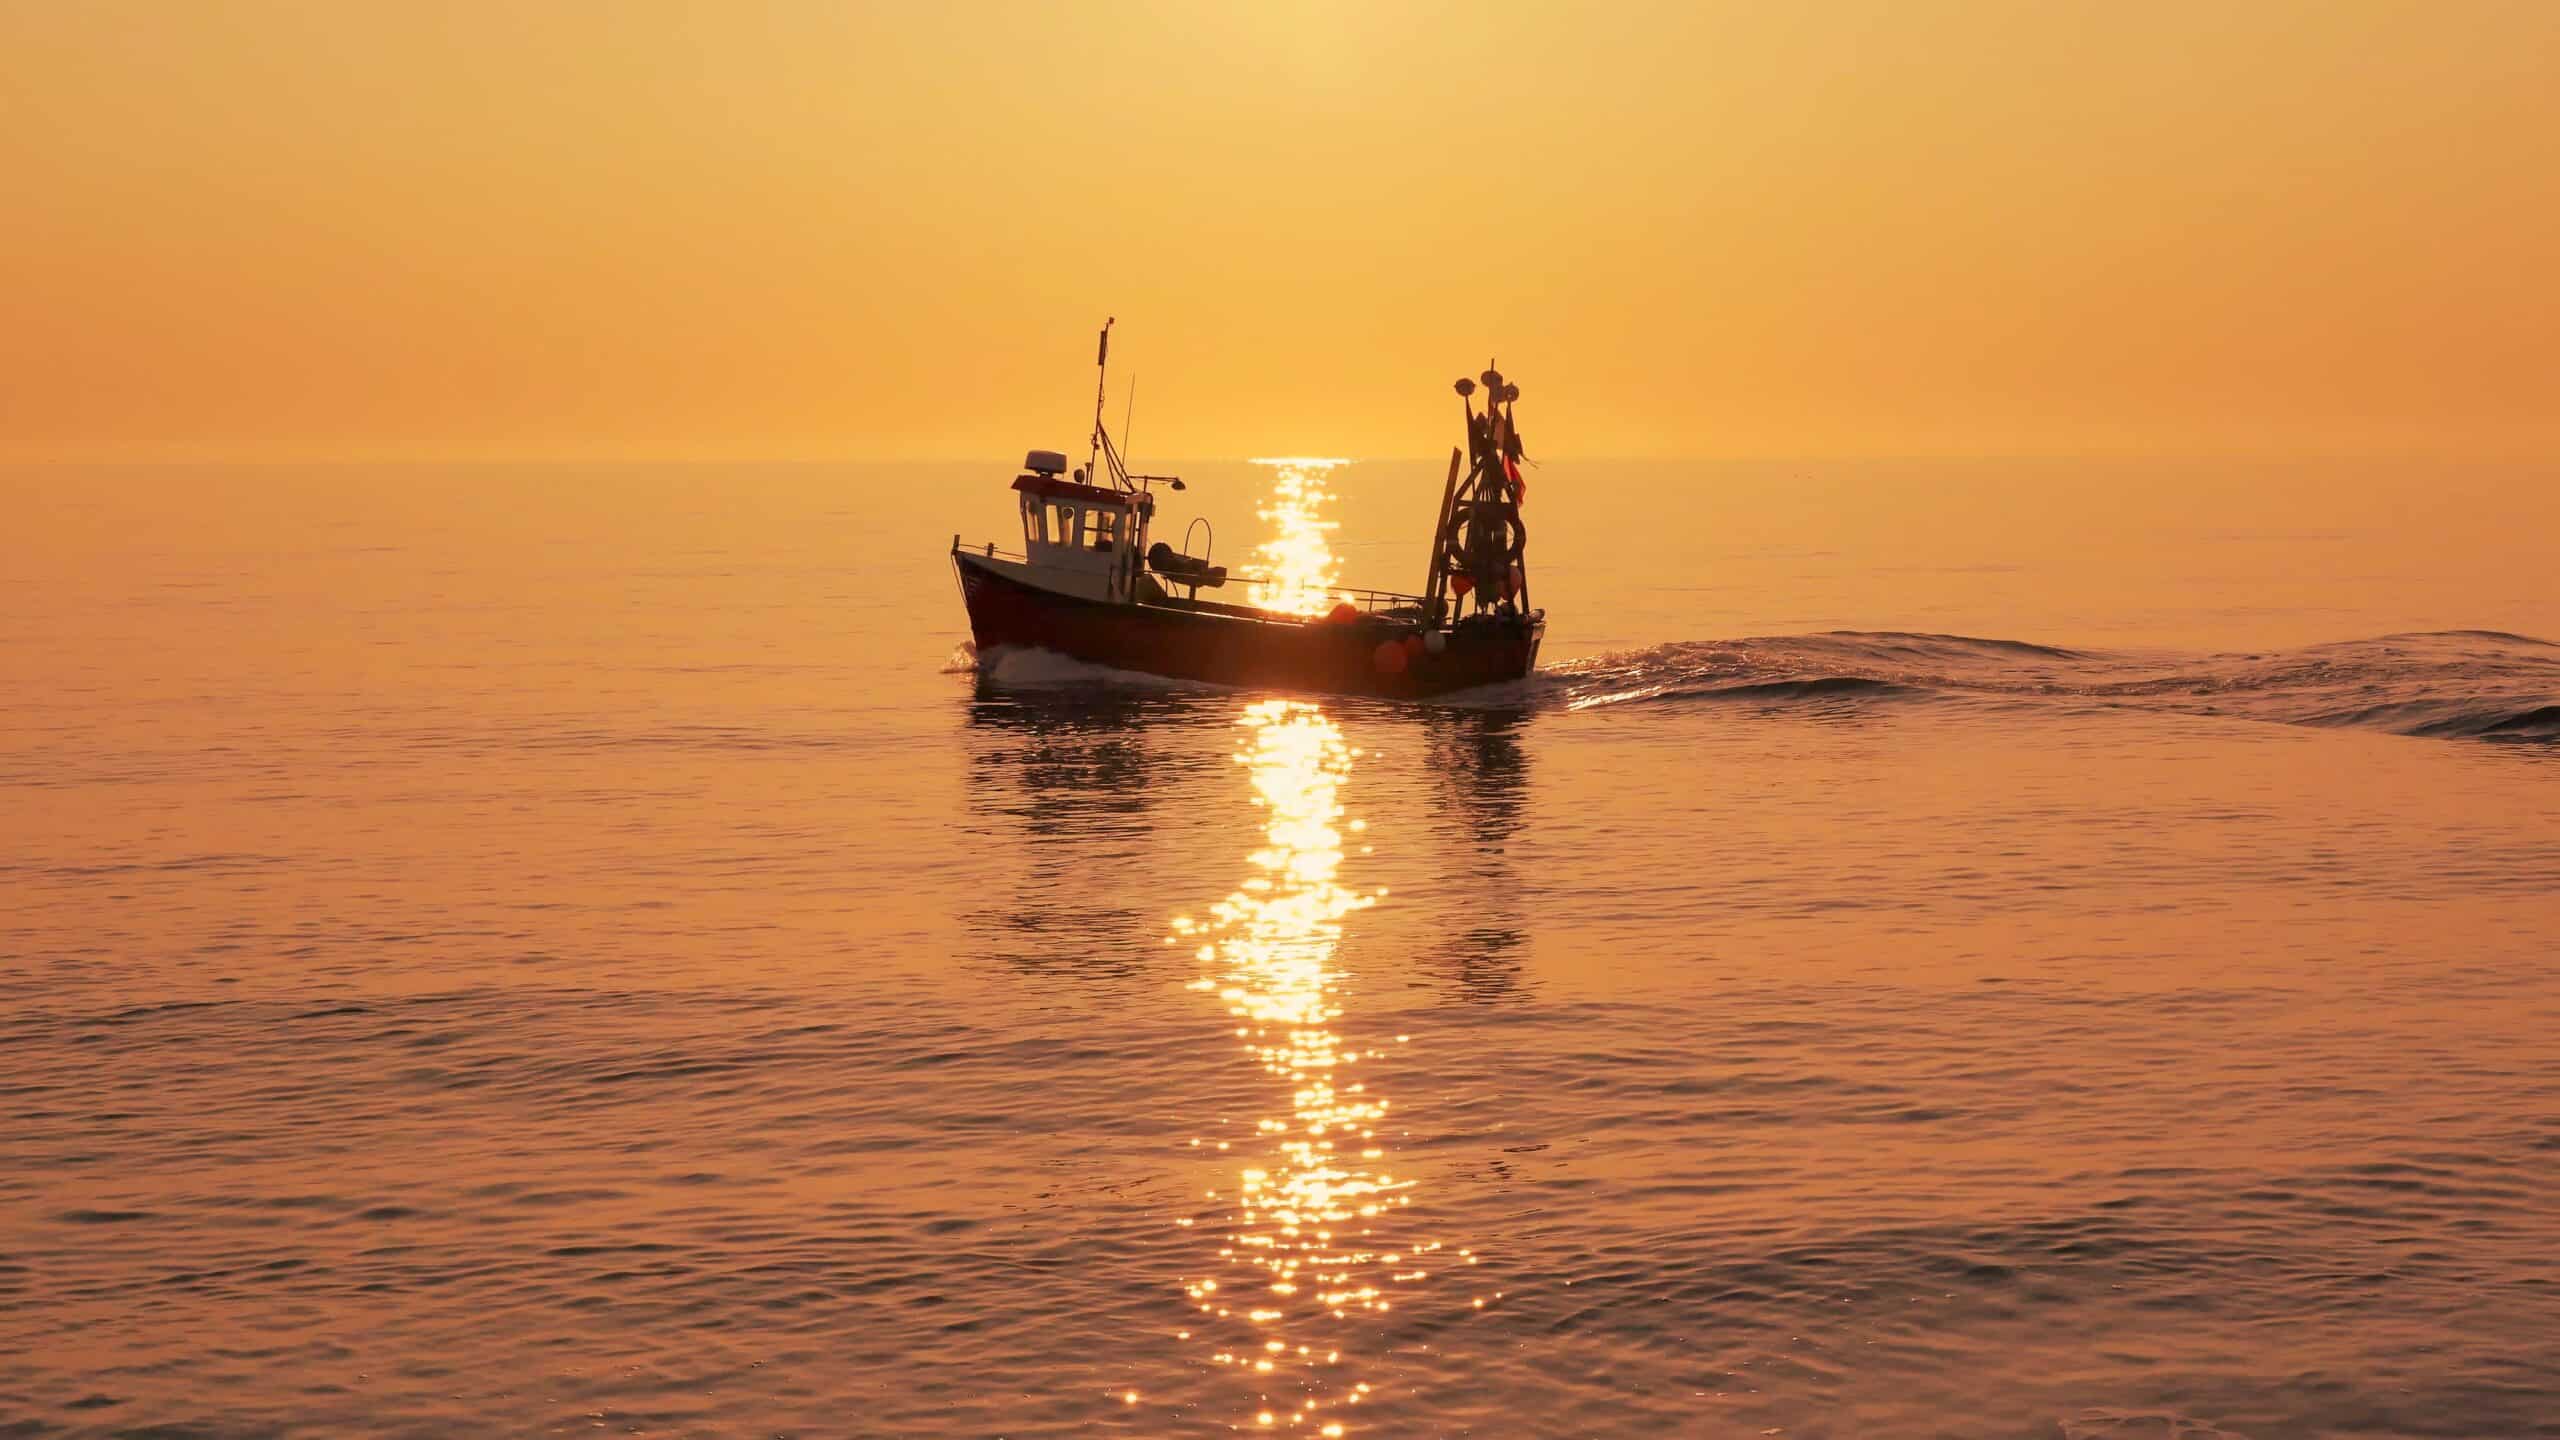 Fishing boat on a calm sea in early morning autumnal sunlight.